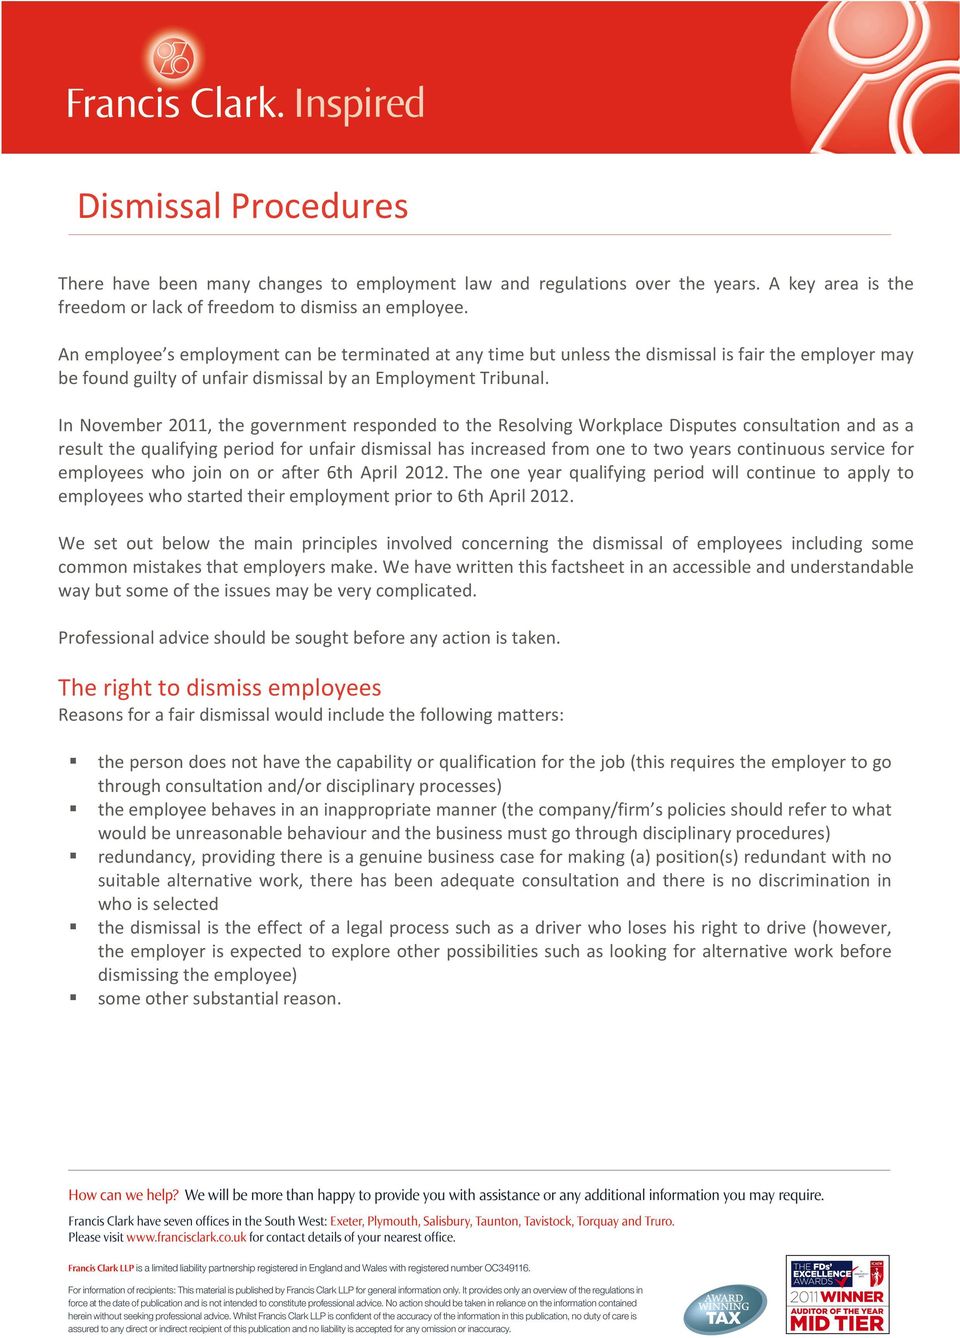 In November 2011, the government responded to the Resolving Workplace Disputes consultation and as a result the qualifying period for unfair dismissal has increased from one to two years continuous